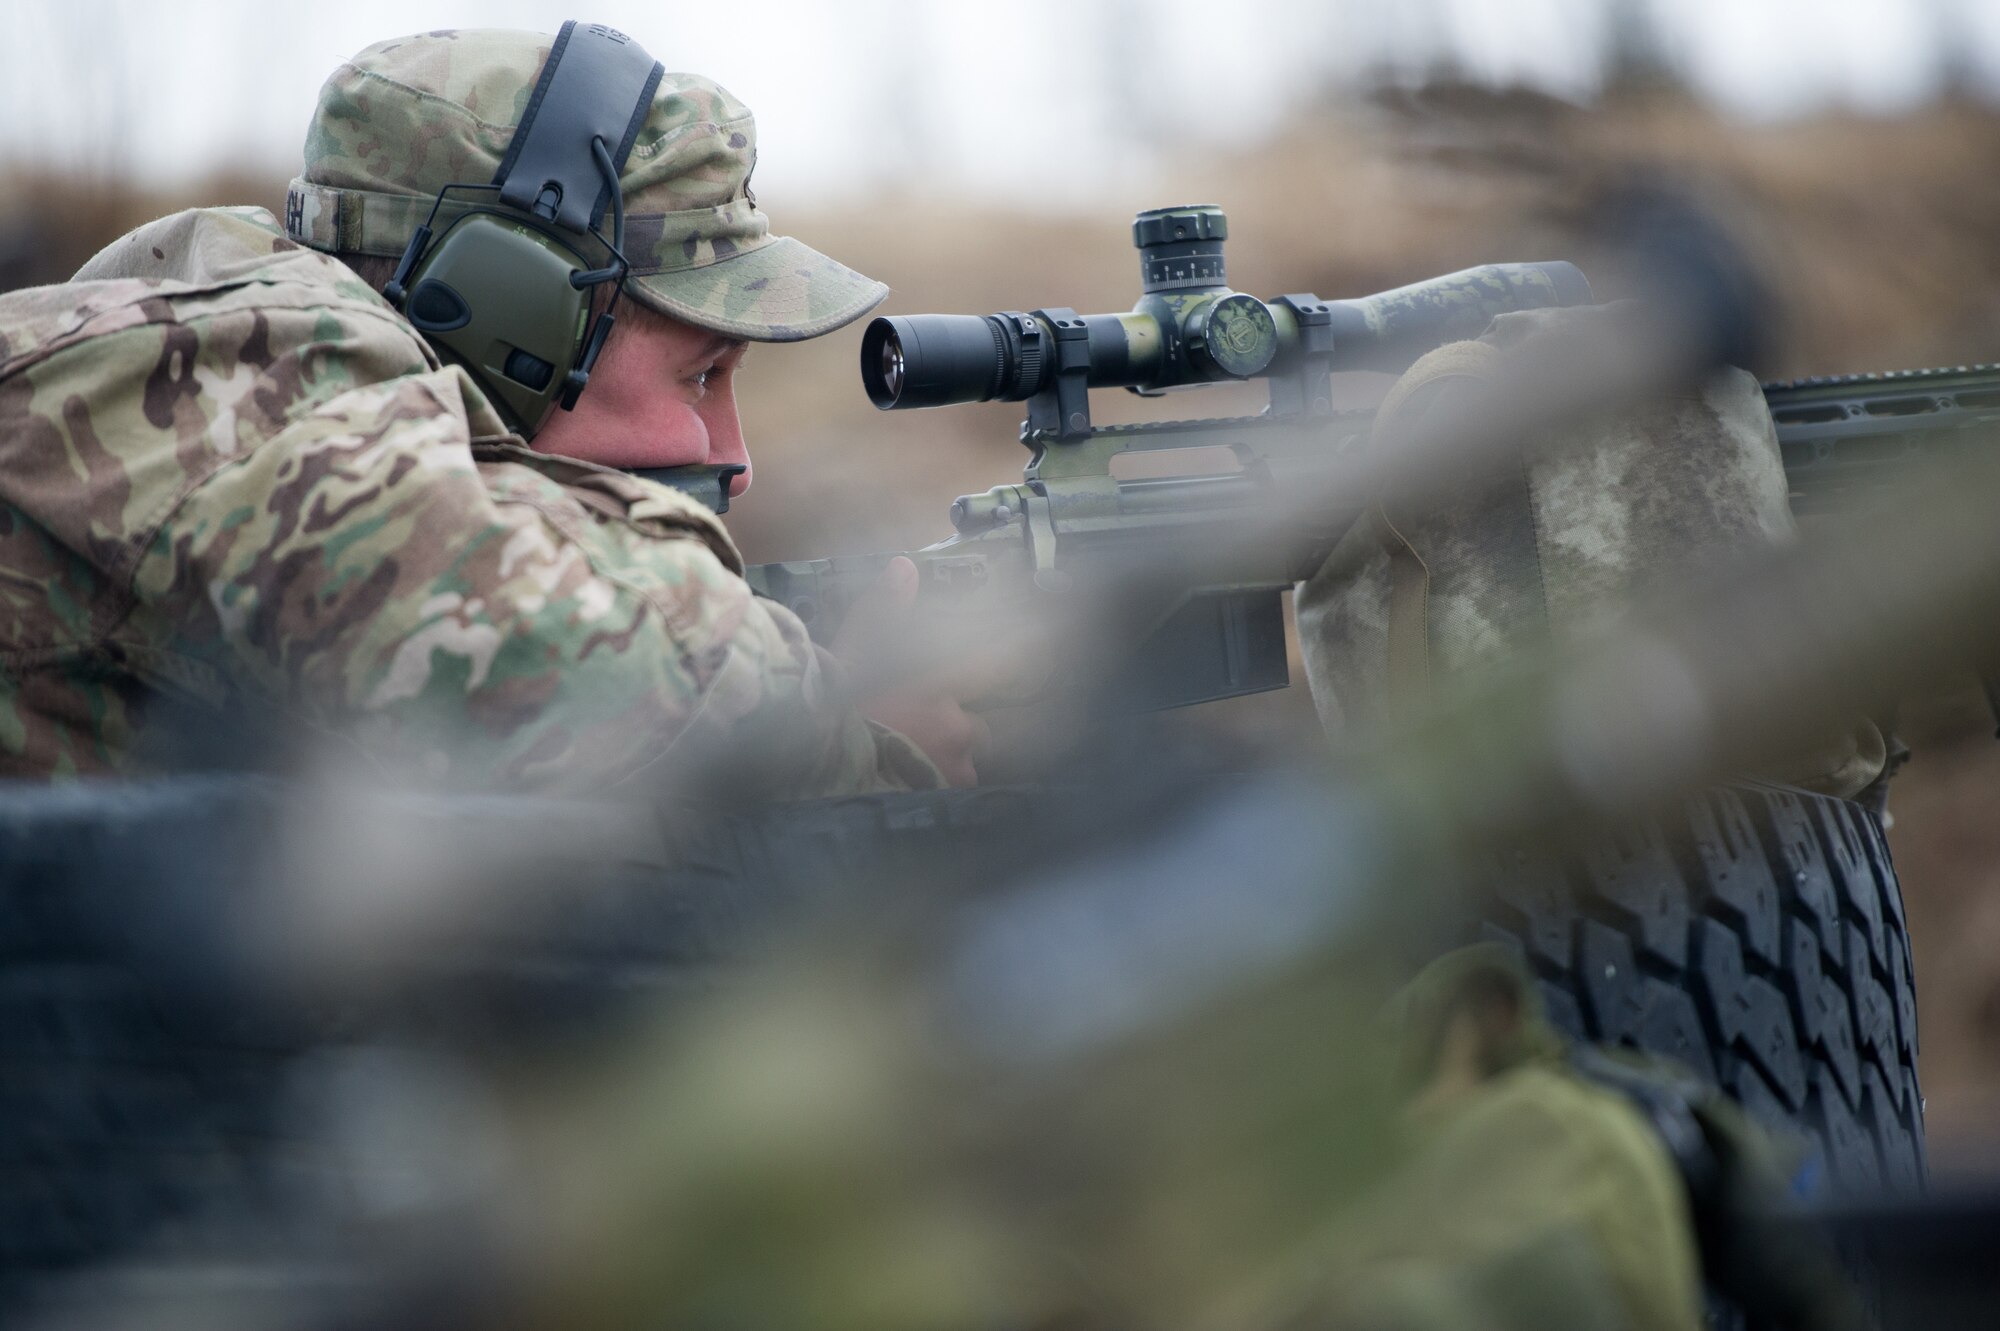 Army Spc. Eric Haugh, a native of Graham, Wash., assigned to Charlie Troop, 1st Squadron, 40th Cavalry Regiment (Airborne), 4th Infantry Brigade Combat Team (Airborne), 25th Infantry Division, U.S. Army Alaska, aims at a target with his M2010 Enhanced Sniper Rifle on Statler range at Joint Base Elmendorf-Richardson, Alaska, April 6, 2018, during marksmanship training.  A sniper's main responsibility is to deliver discriminatory, highly accurate rifle fire against enemy targets that cannot be engaged successfully by the regular rifleman due to range, size, location, fleeting nature, or visibility.